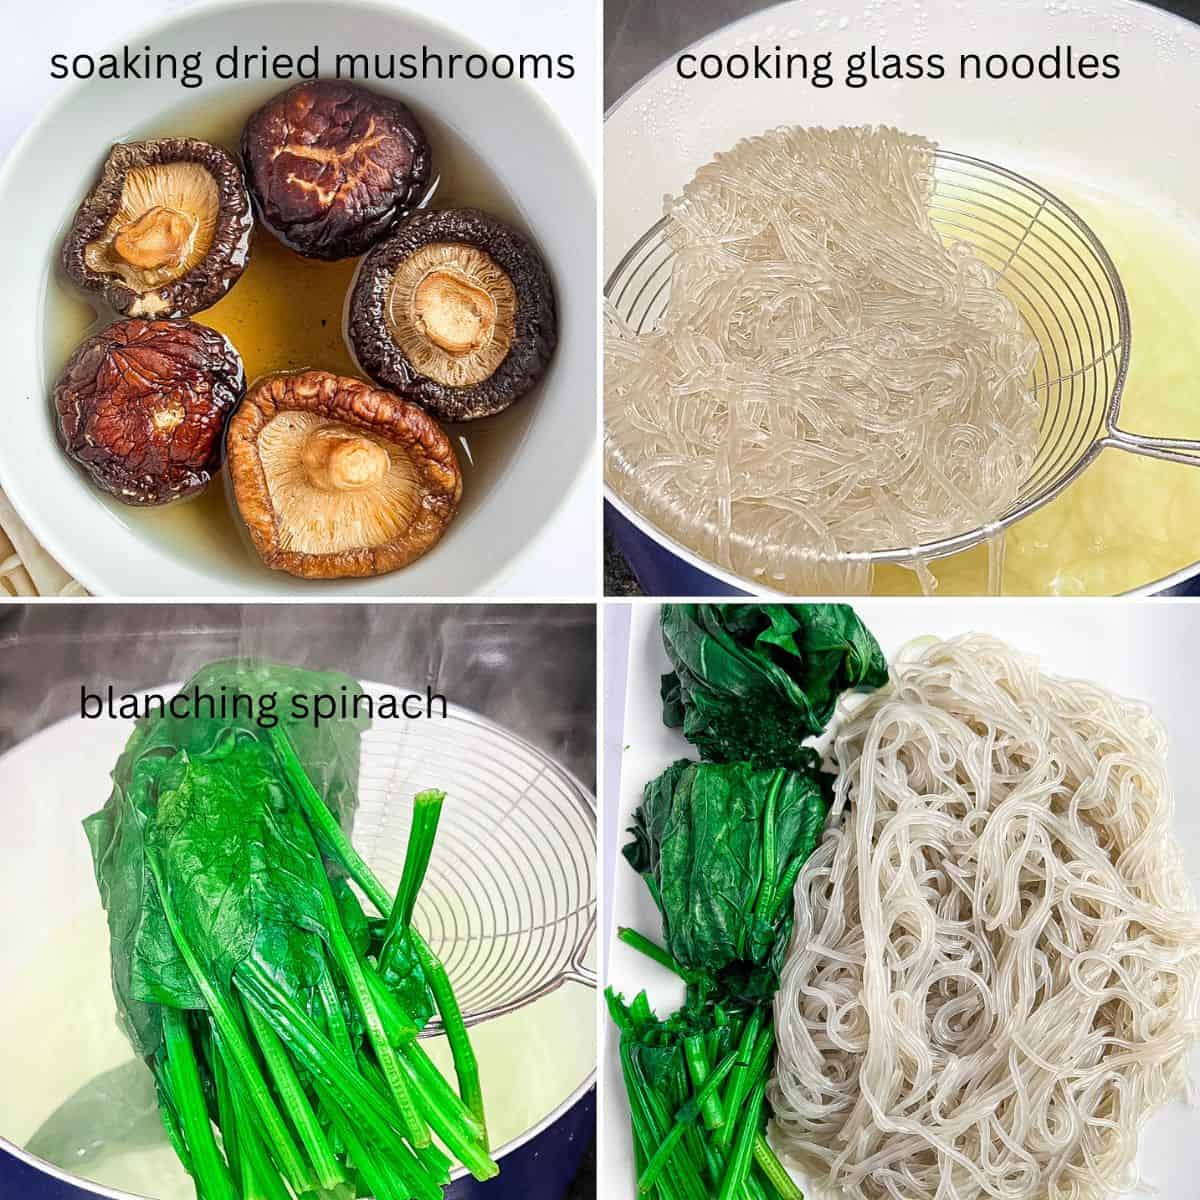 Instructions on cooking japchae.